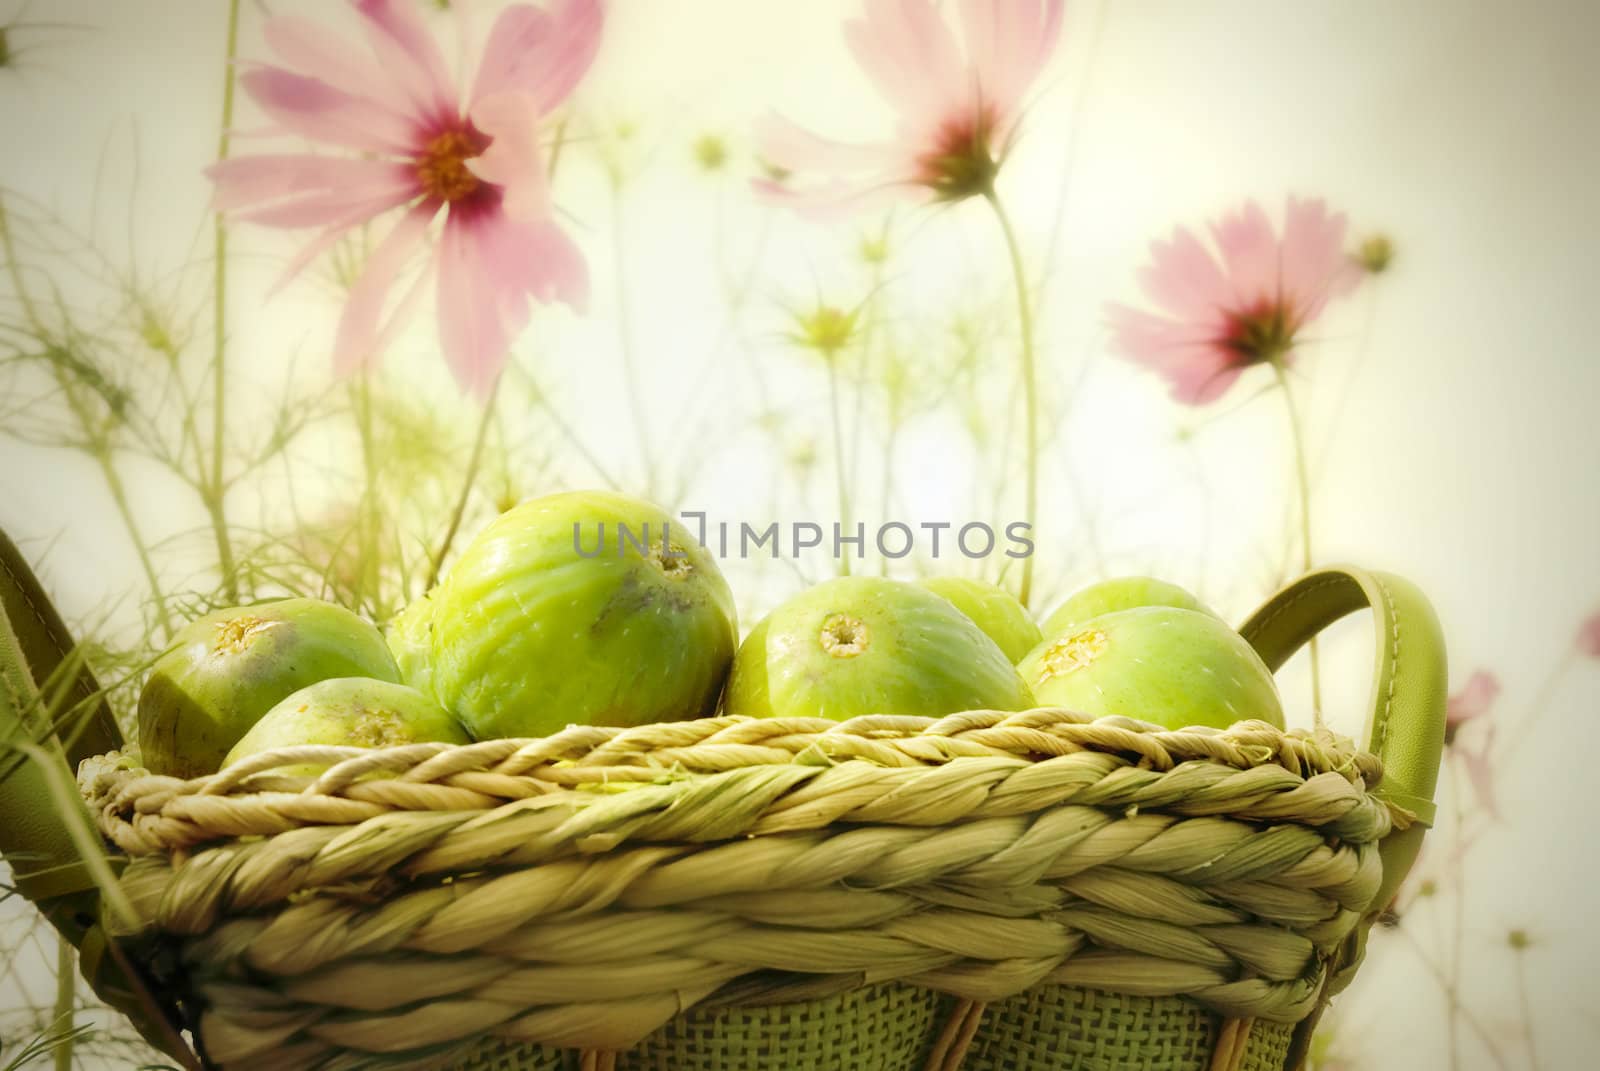 basket of figs in the garden of daisies